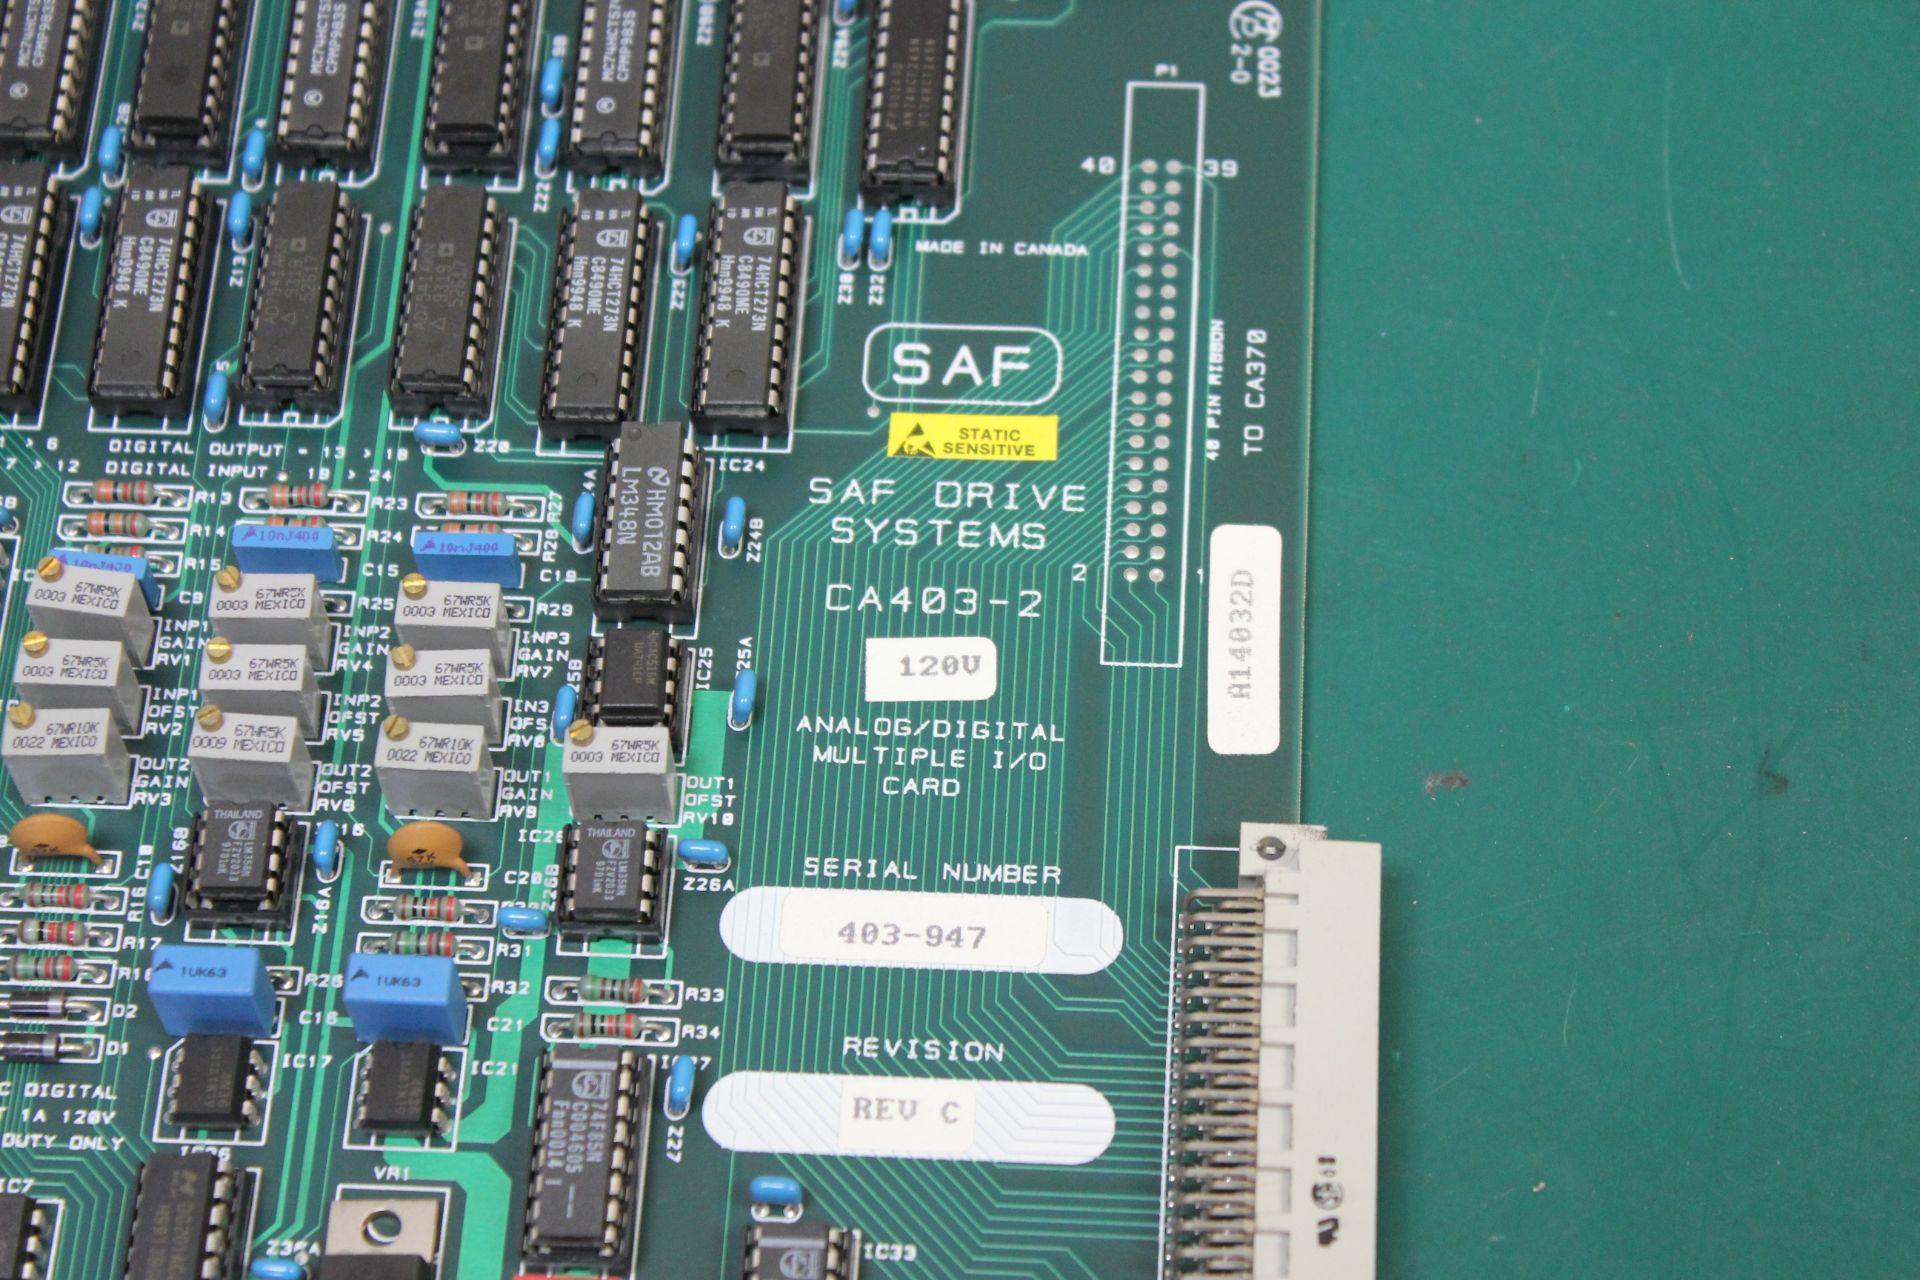 SAF DRIVE SYSTEMS CA403 MULTIPLE INPUT/OUTPUT CARD - Image 3 of 3